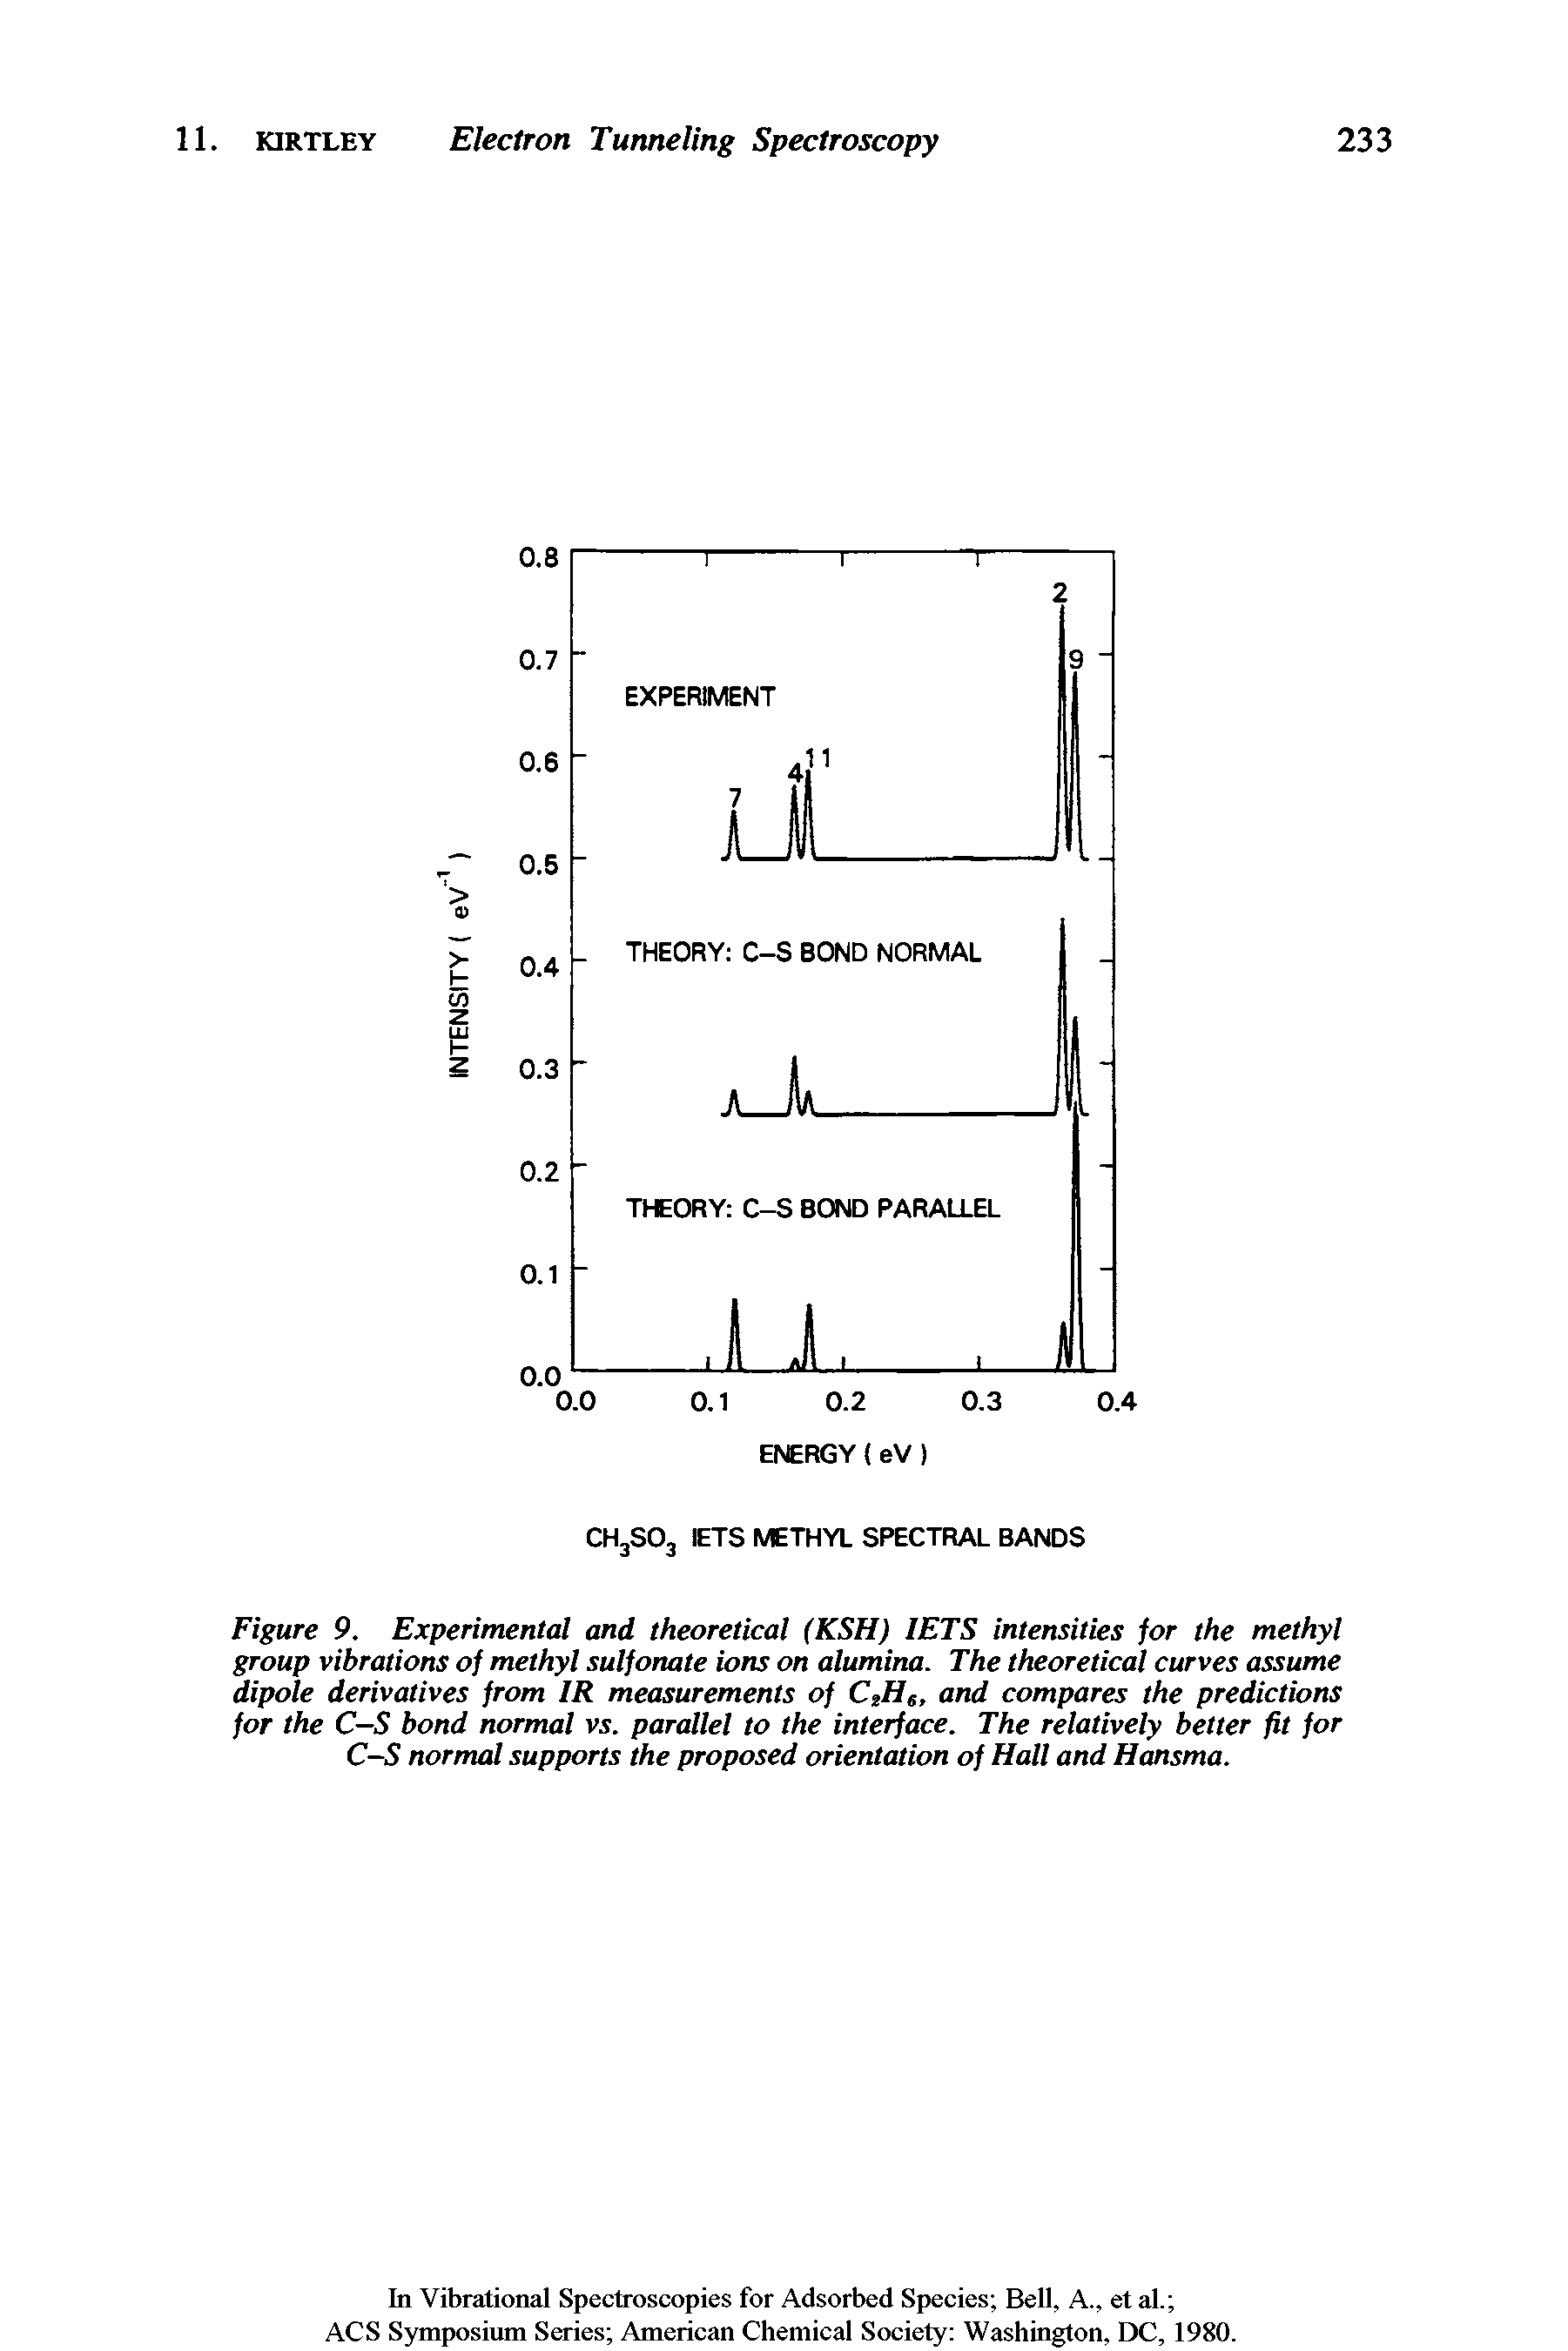 Figure 9. Experimental and theoretical (KSH) IETS intensities for the methyl group vibrations of methyl sulfonate ions on alumina. The theoretical curves assume dipole derivatives from IR measurements of C2He, and compares the predictions for the C—S bond normal vs. parallel to the interface. The relatively better fit for C-S normal supports the proposed orientation of Hall and Hansma.